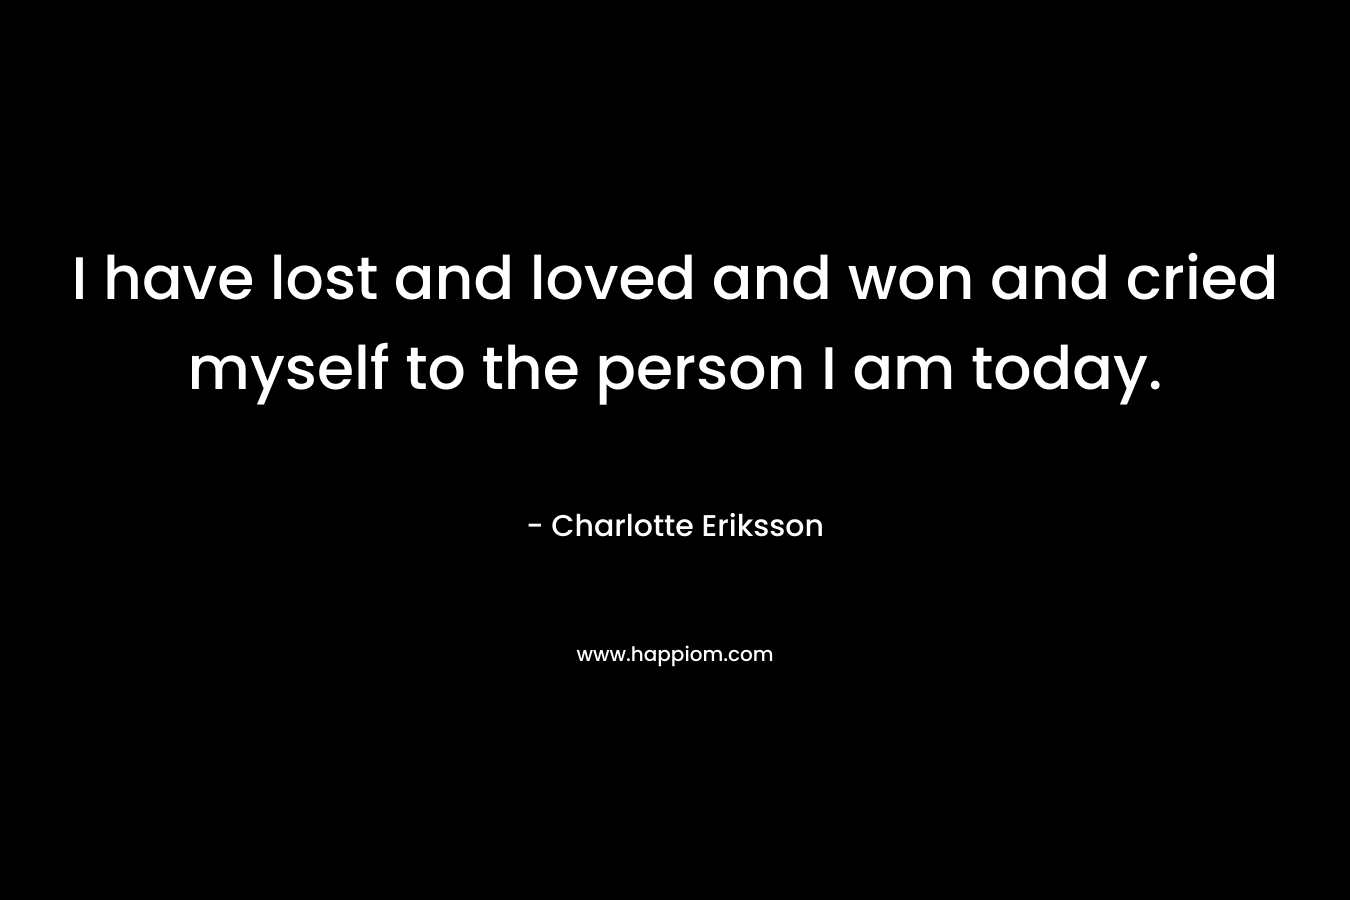 I have lost and loved and won and cried myself to the person I am today.